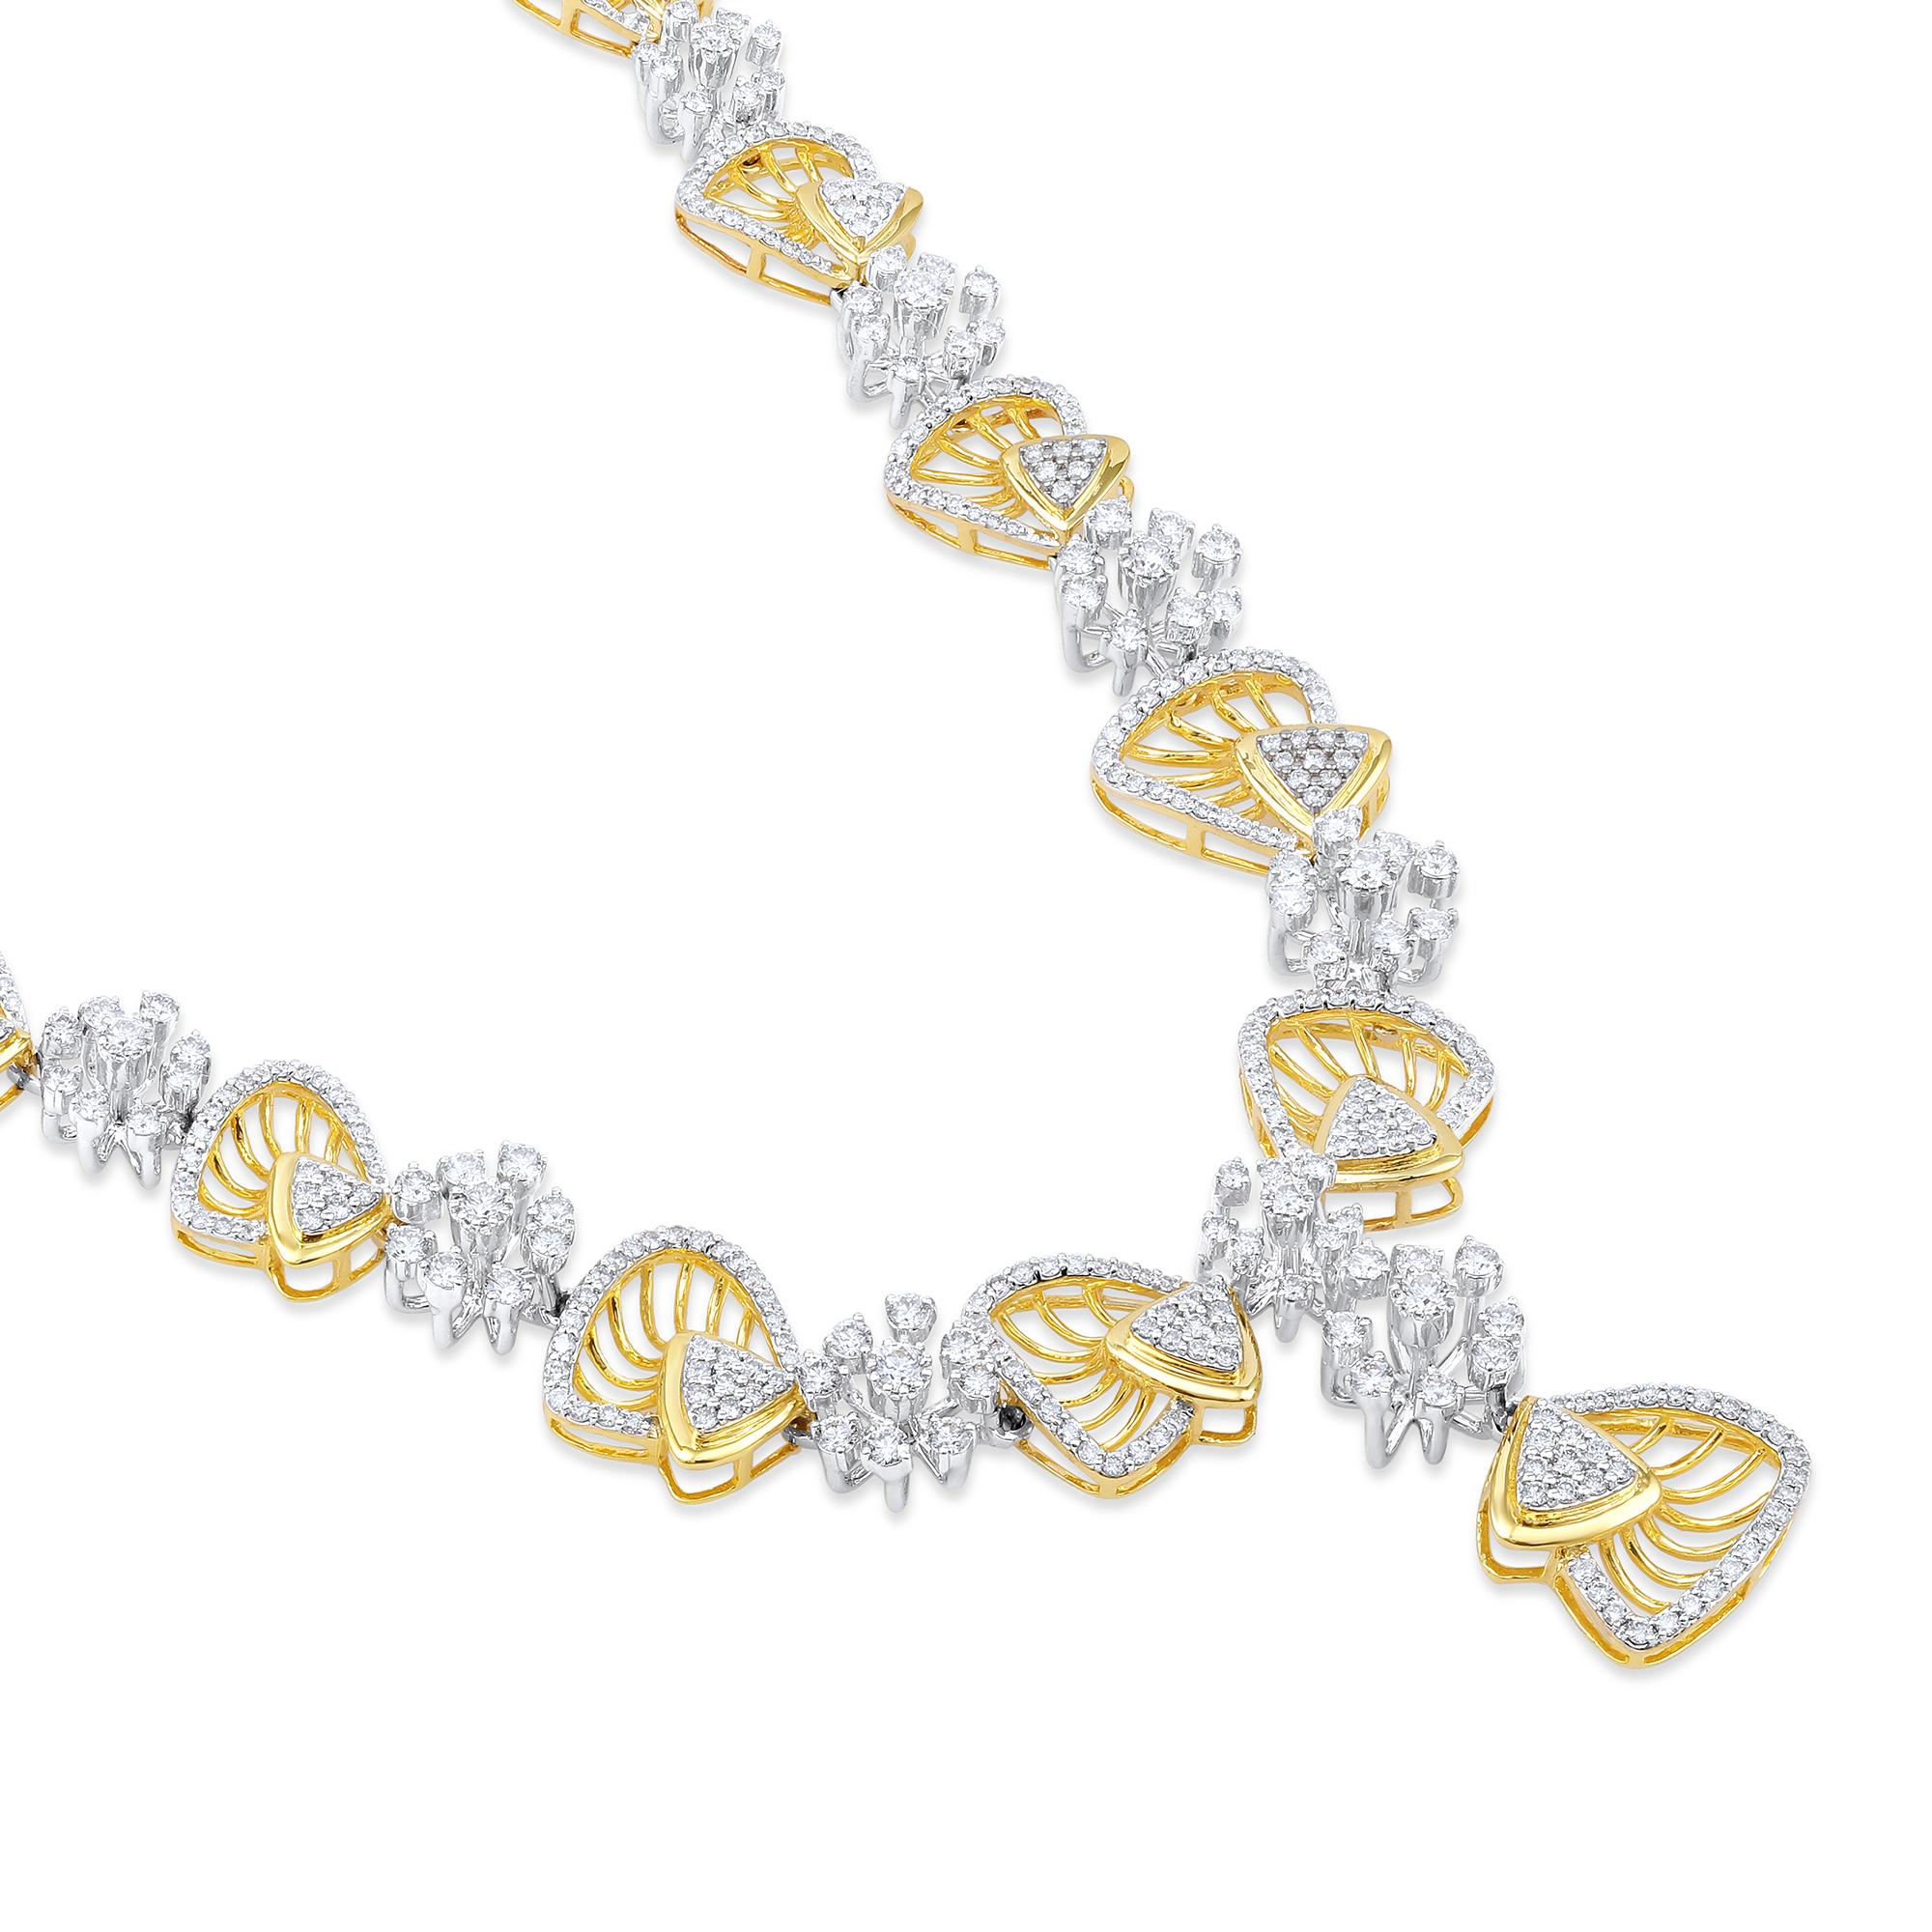 Crafted in 41.75 grams of 14-karat Yellow Gold, contains 544 Stones of Round Diamonds with a total of 5.14-Carats in G-H Color and VS Clarity. The Necklace is 20-inch in Length.

CONTEMPORARY AND TIMELESS ESSENCE: Crafted in 14-karat/18-karat with